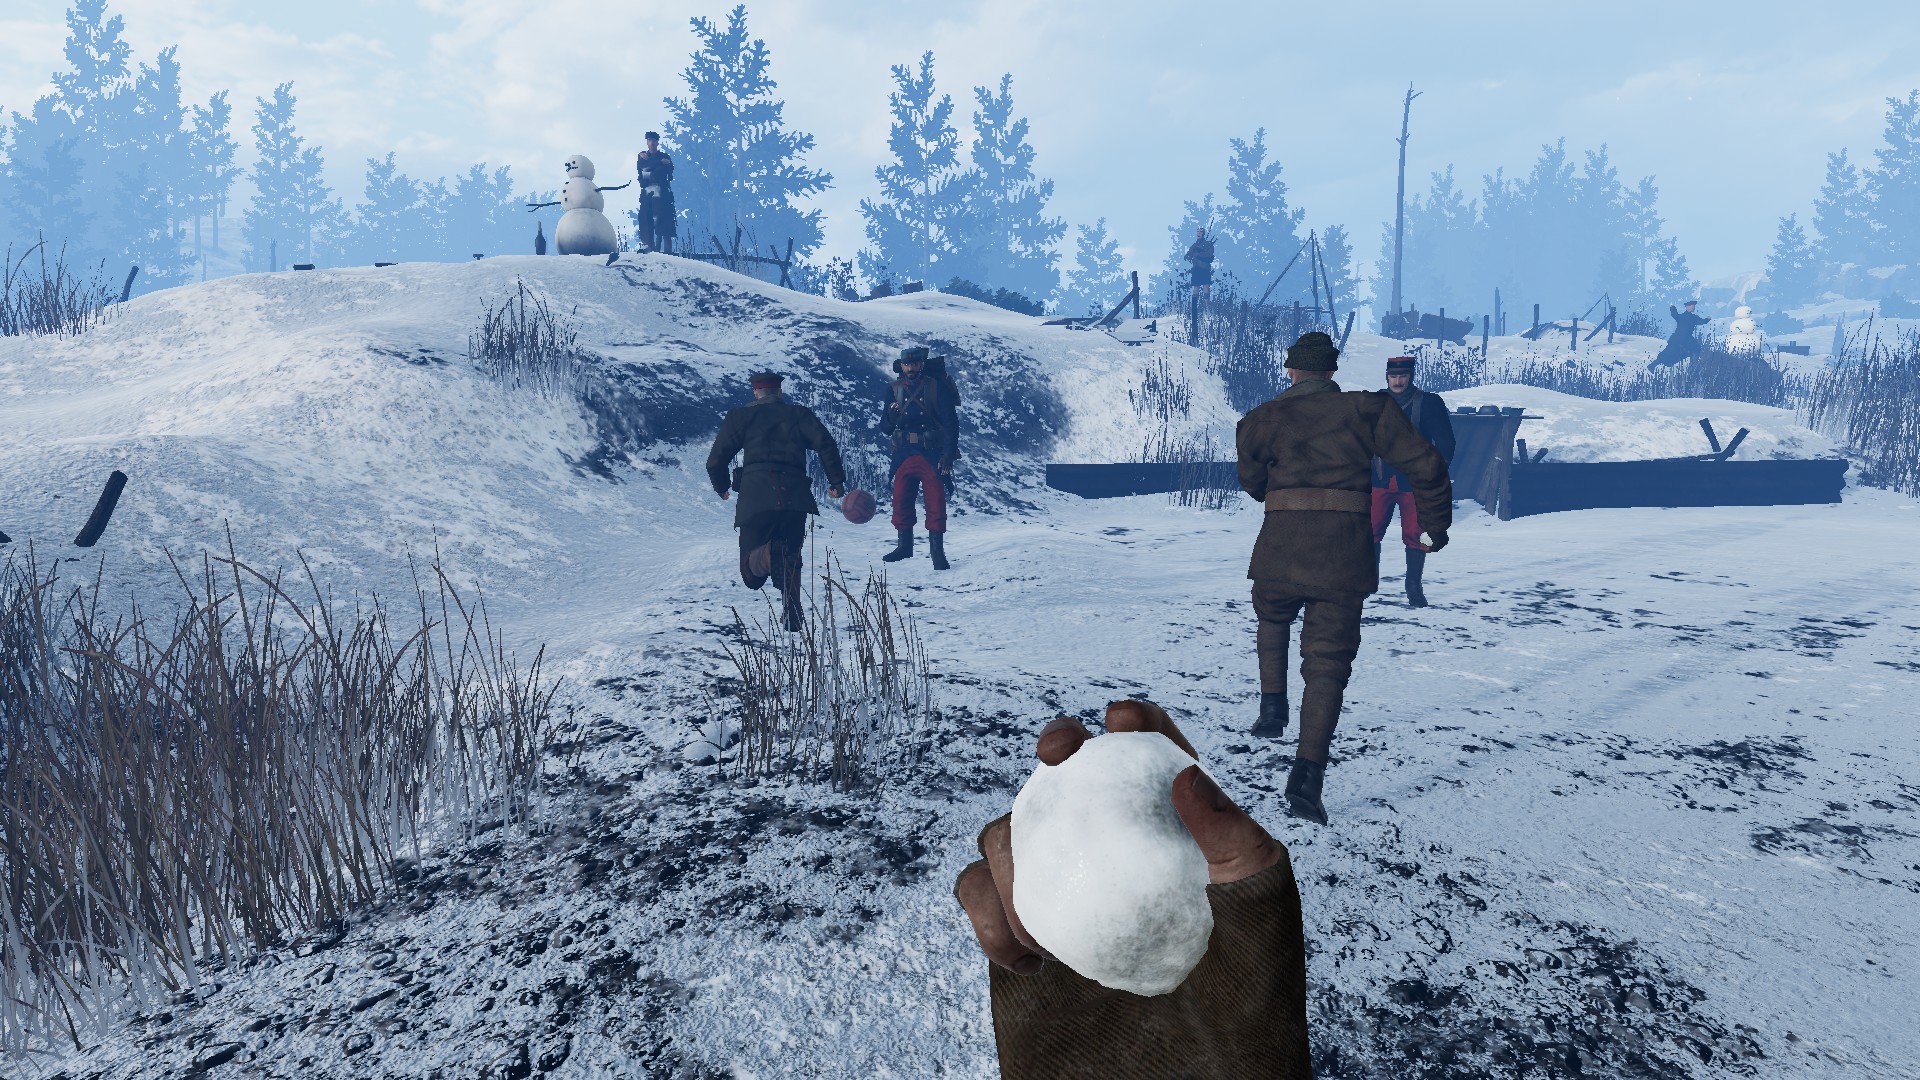 Soldiers run after a football while the player is holding a snowball.